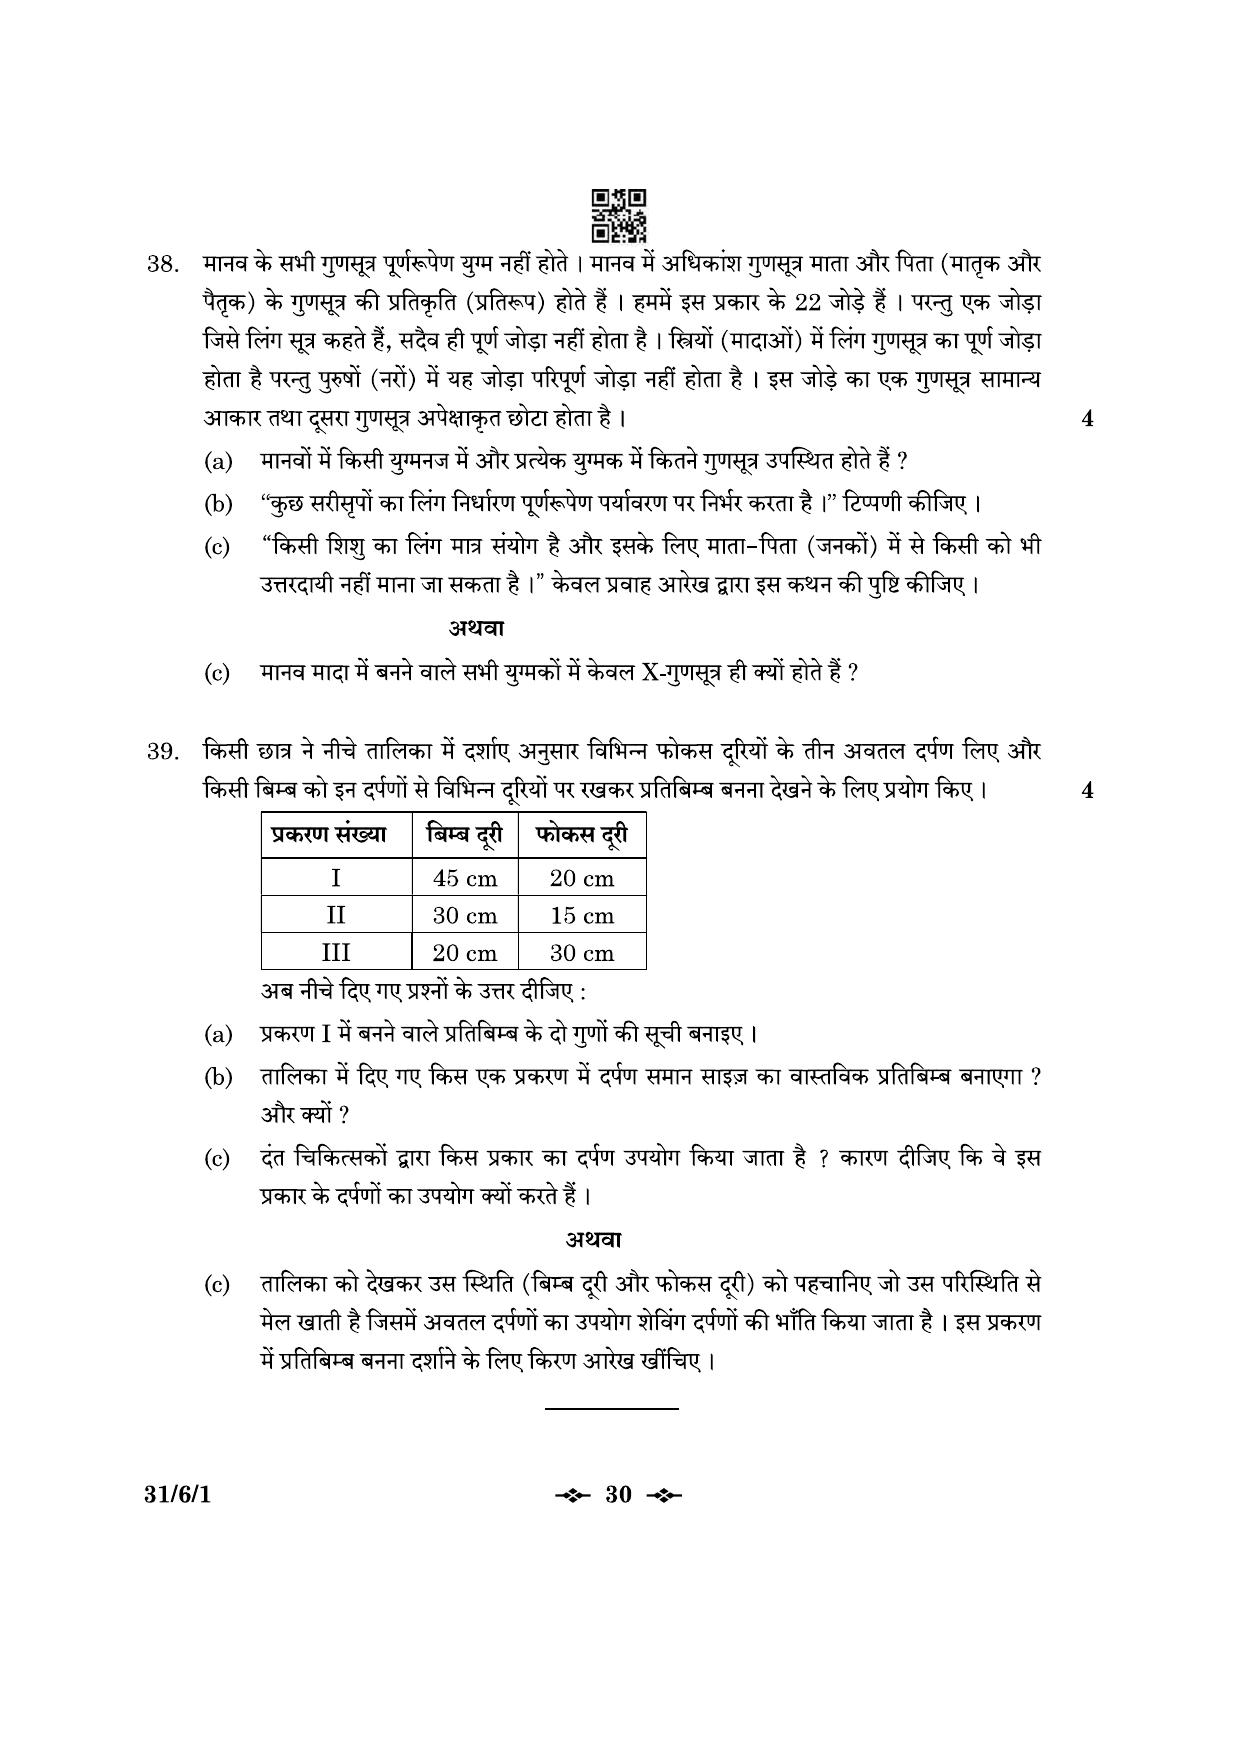 CBSE Class 10 31-6-1 Science 2023 Question Paper - Page 30